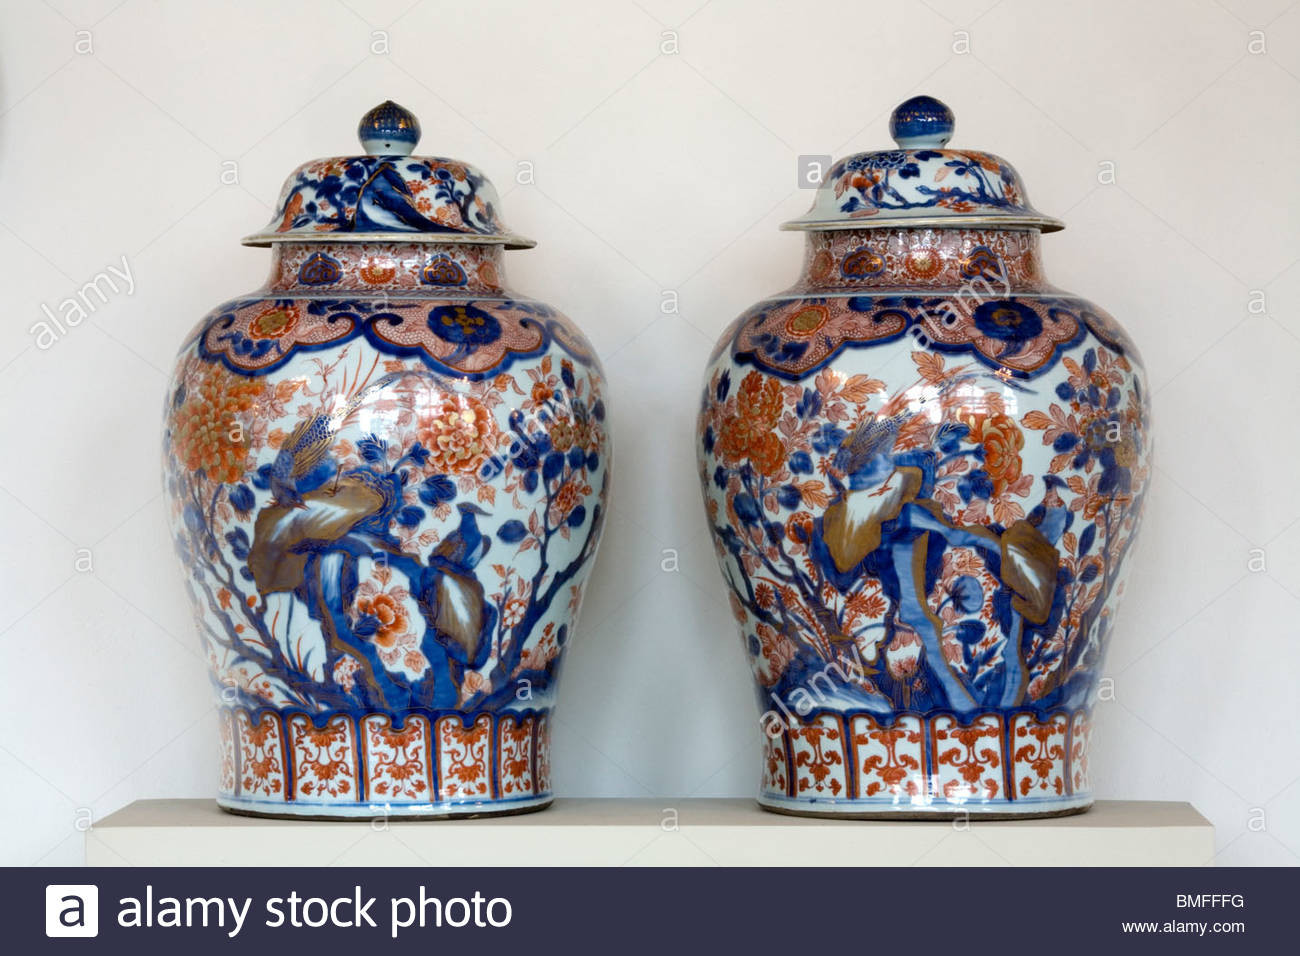 20 Fabulous Chinese Porcelain Vases for Sale 2023 free download chinese porcelain vases for sale of imari porcelain stock photos imari porcelain stock images alamy with chinese imari porcelain vases of the kangxi period 1662 1722 porcelain museum in